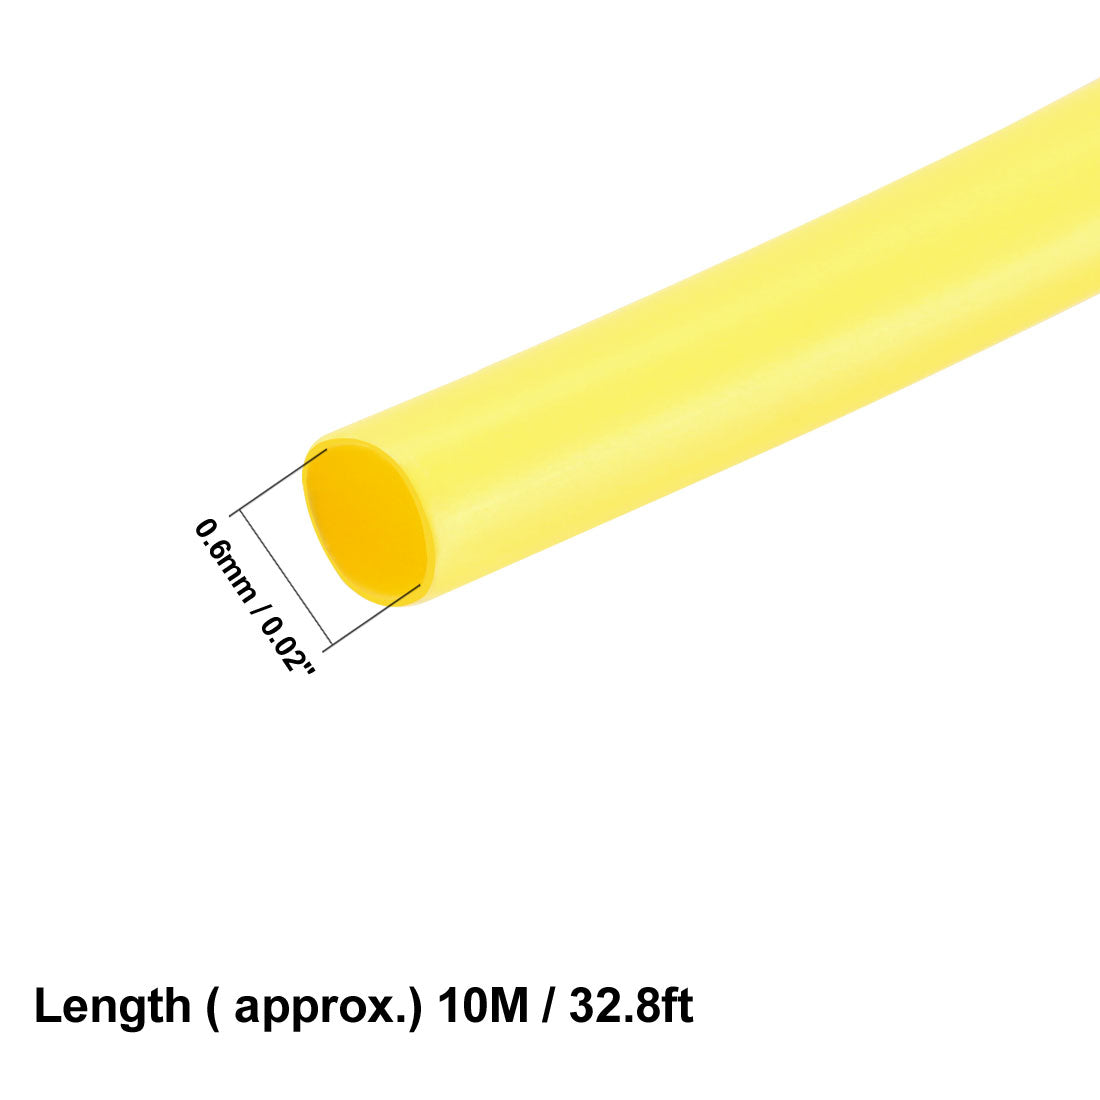 uxcell Uxcell Heat Shrink Tube 2:1 Electrical Insulation Tube Wire Cable Tubing Sleeving Wrap Yellow 0.6mm Diameter 10m Long